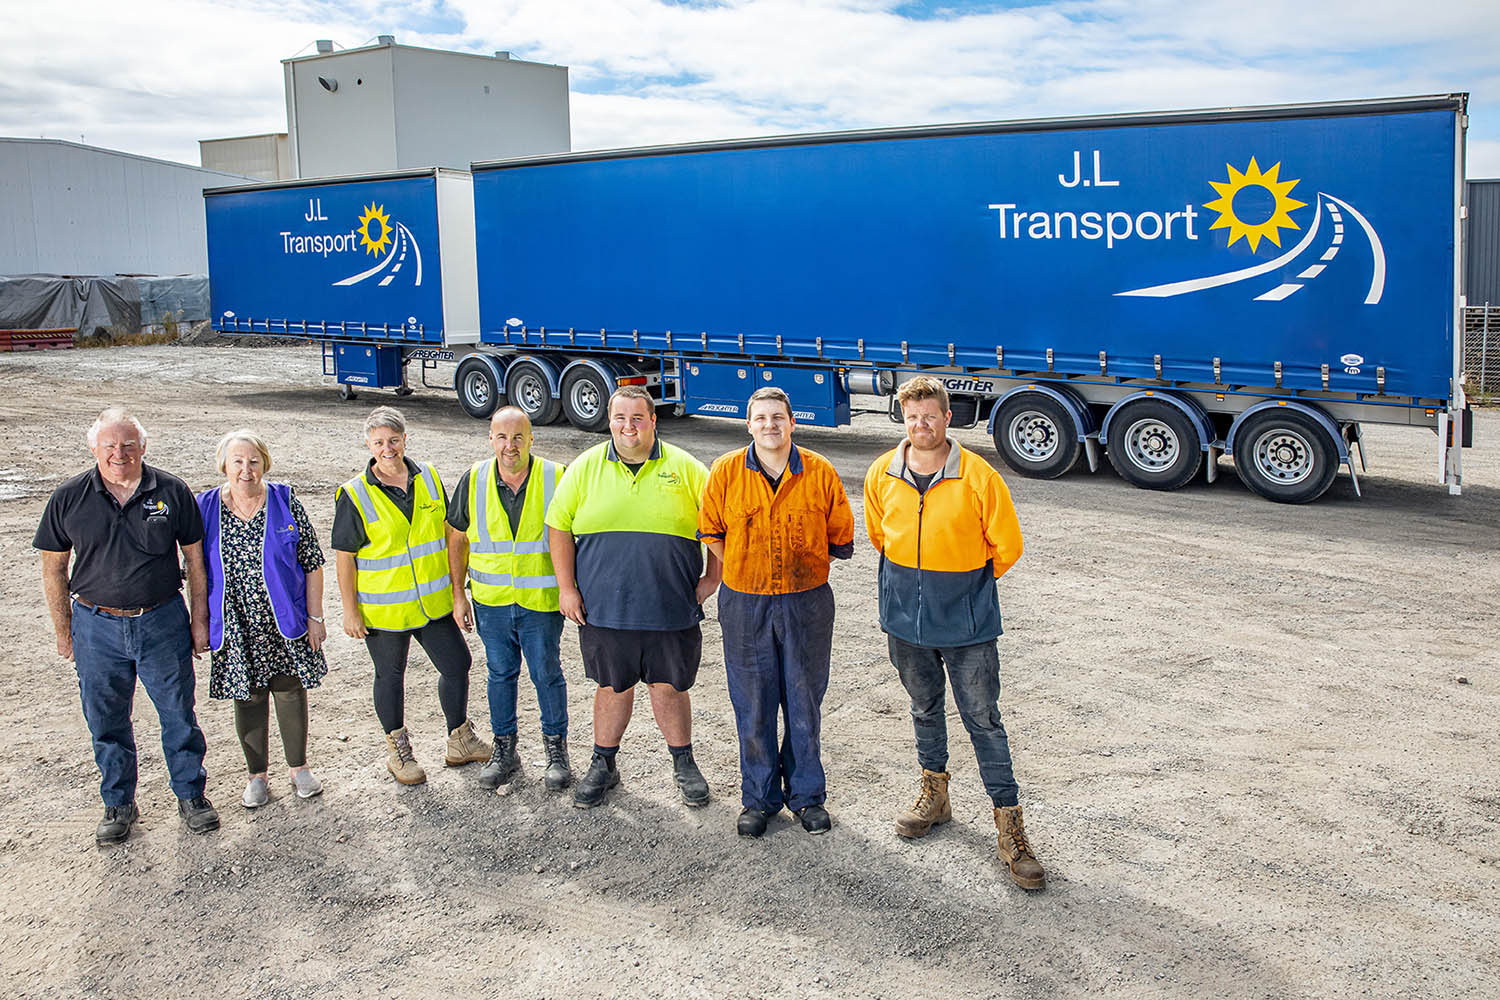 JL Transport family run business with Freighter semi trailers